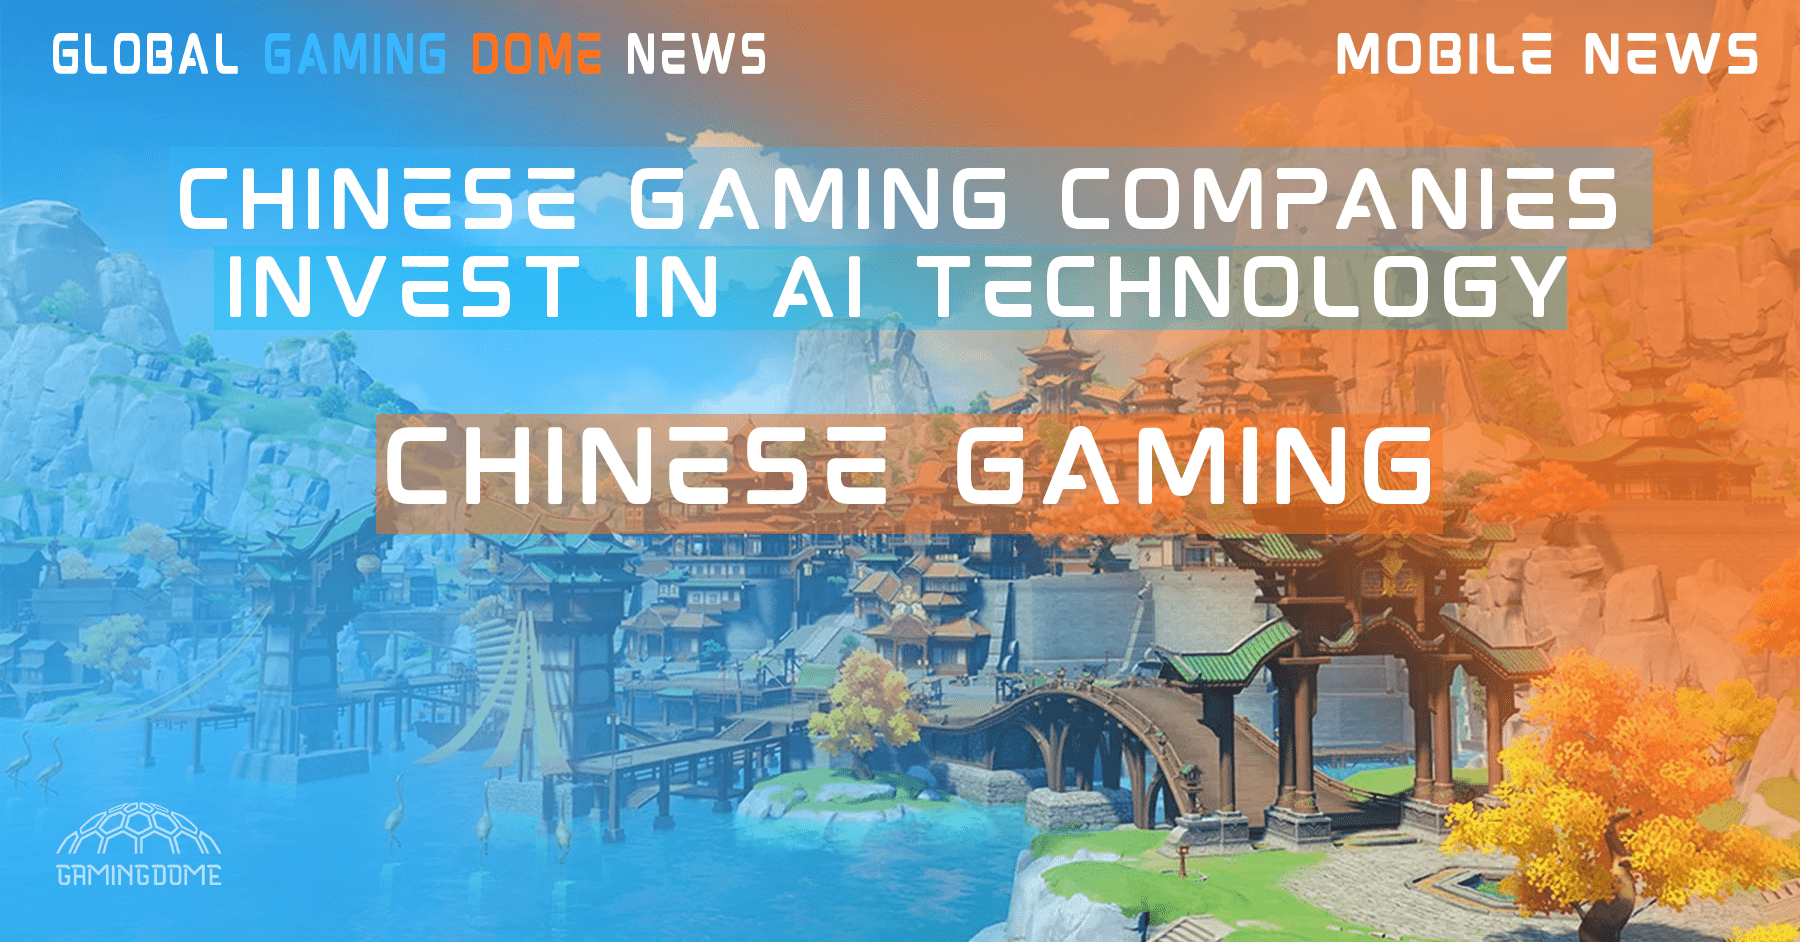 CHINESE GAMING COMPANIES INVEST IN AI TECHNOLOGY